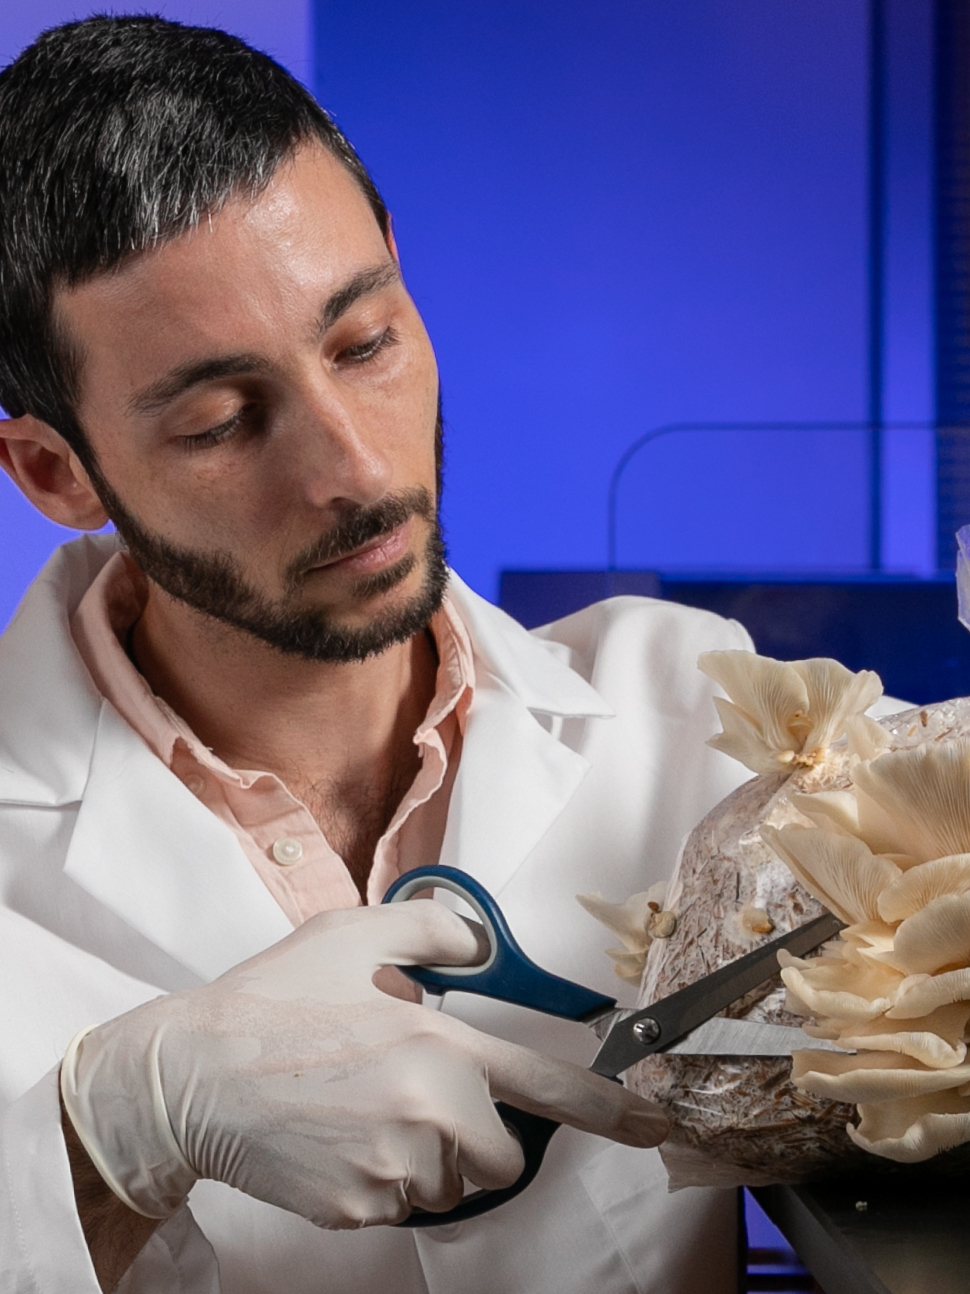 Research Scientist Kyle Gabriel, center, removes the fruiting body of the Oyster mushrooms on a bag of wheat straw and cotton seed hulls as Graduate Research Assistant Daniel Rhiner watches and keeps notes in the BioInnovation Lab at Prillaman Hall on the Kennesaw Campus Thursday August 1, 2019. The BioInnovation Lab grows the mushrooms as part of a USDA-funded study on fungi by KSU researchers. Jason Getz / Kennesaw State University